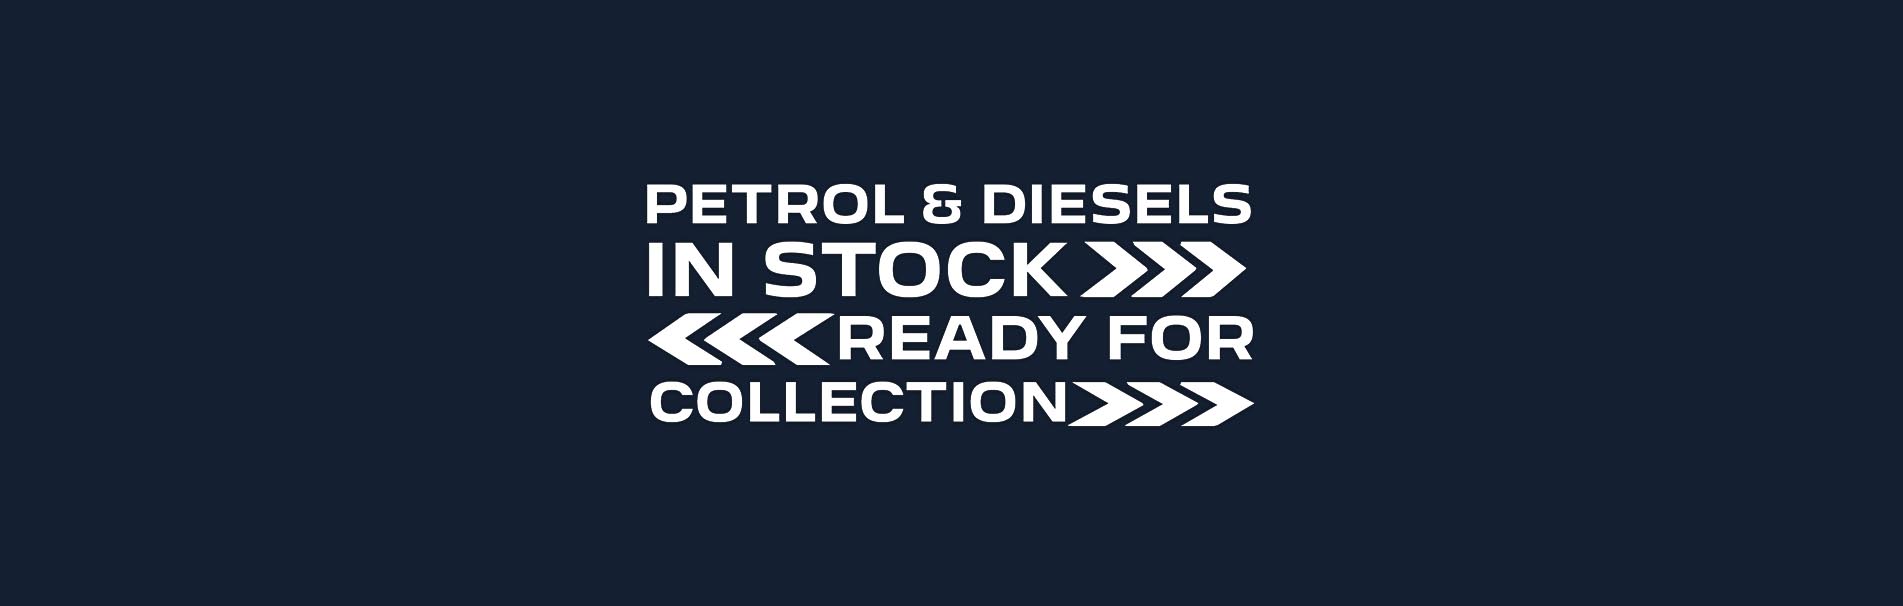 peugeot-petrol-and-diesels-in-stock-and-ready-for-collection-sli